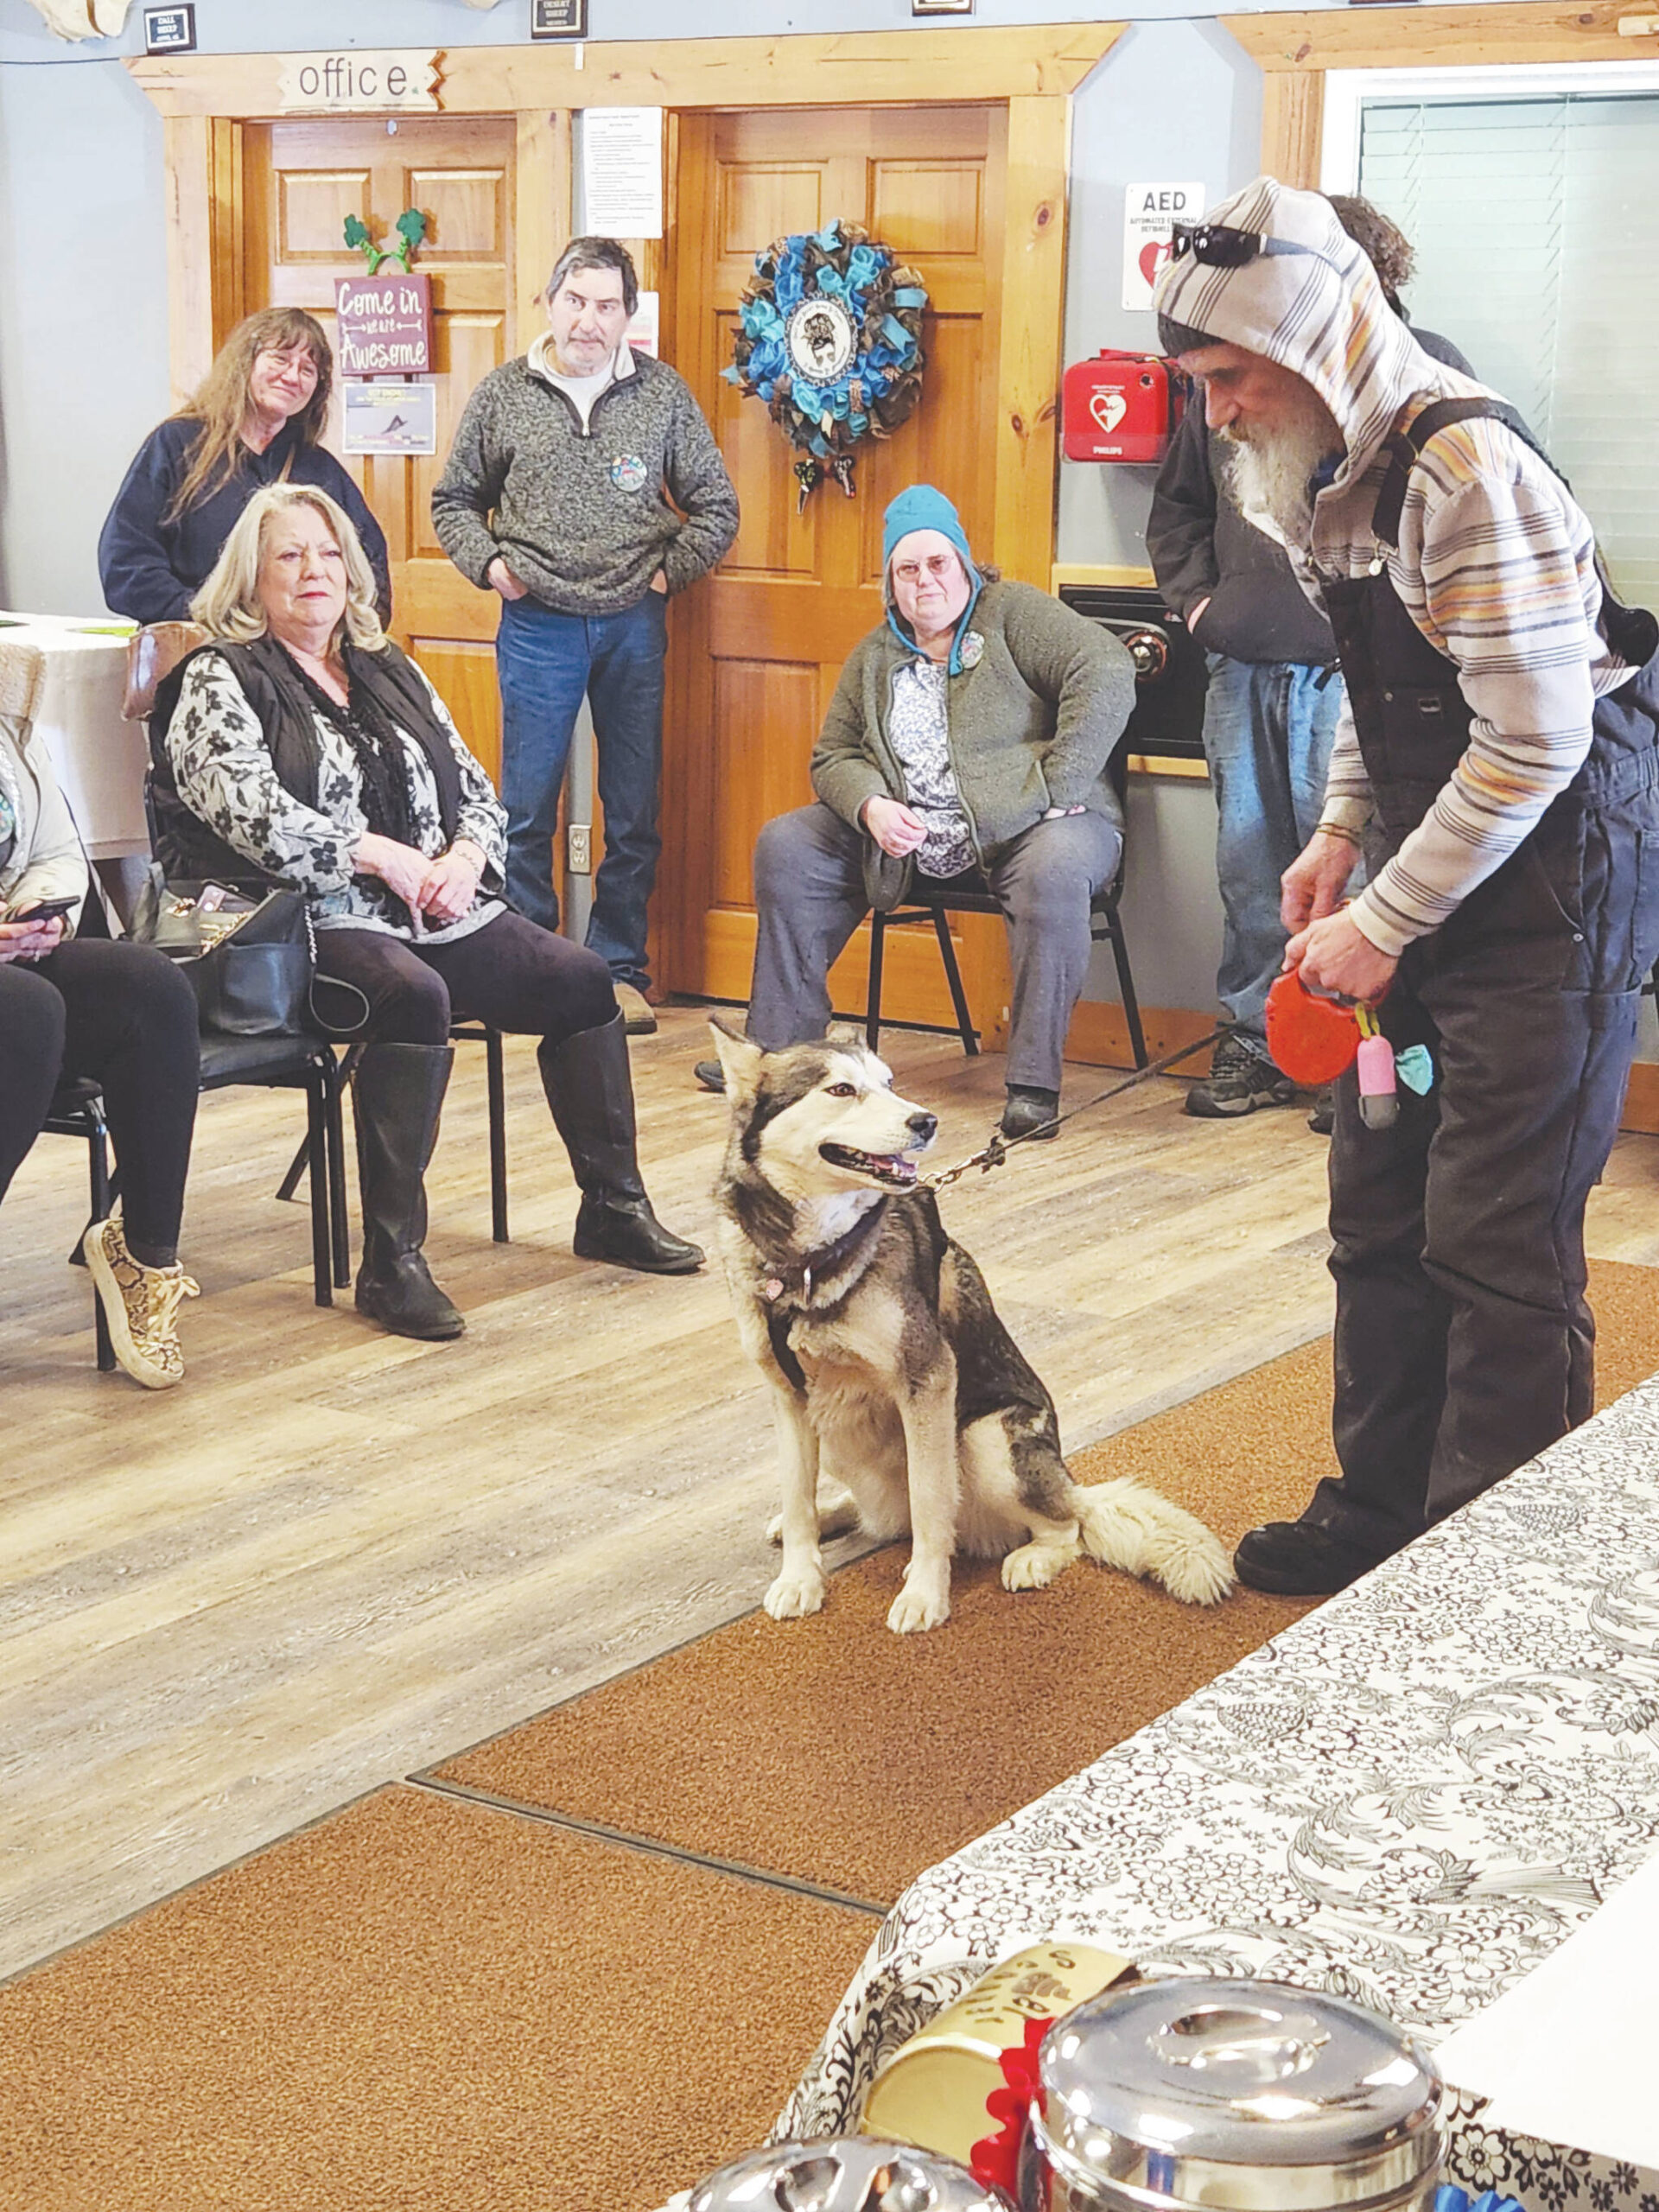 Photo courtesy of Debbie Carpenter
Allen Rasmussen shows his husky, Ayla, to the audience of the Snow Rondi dog show on Sunday at the Anchor Point Senior Center. Ayla won an award for being the “dog that looks most like their owner.”